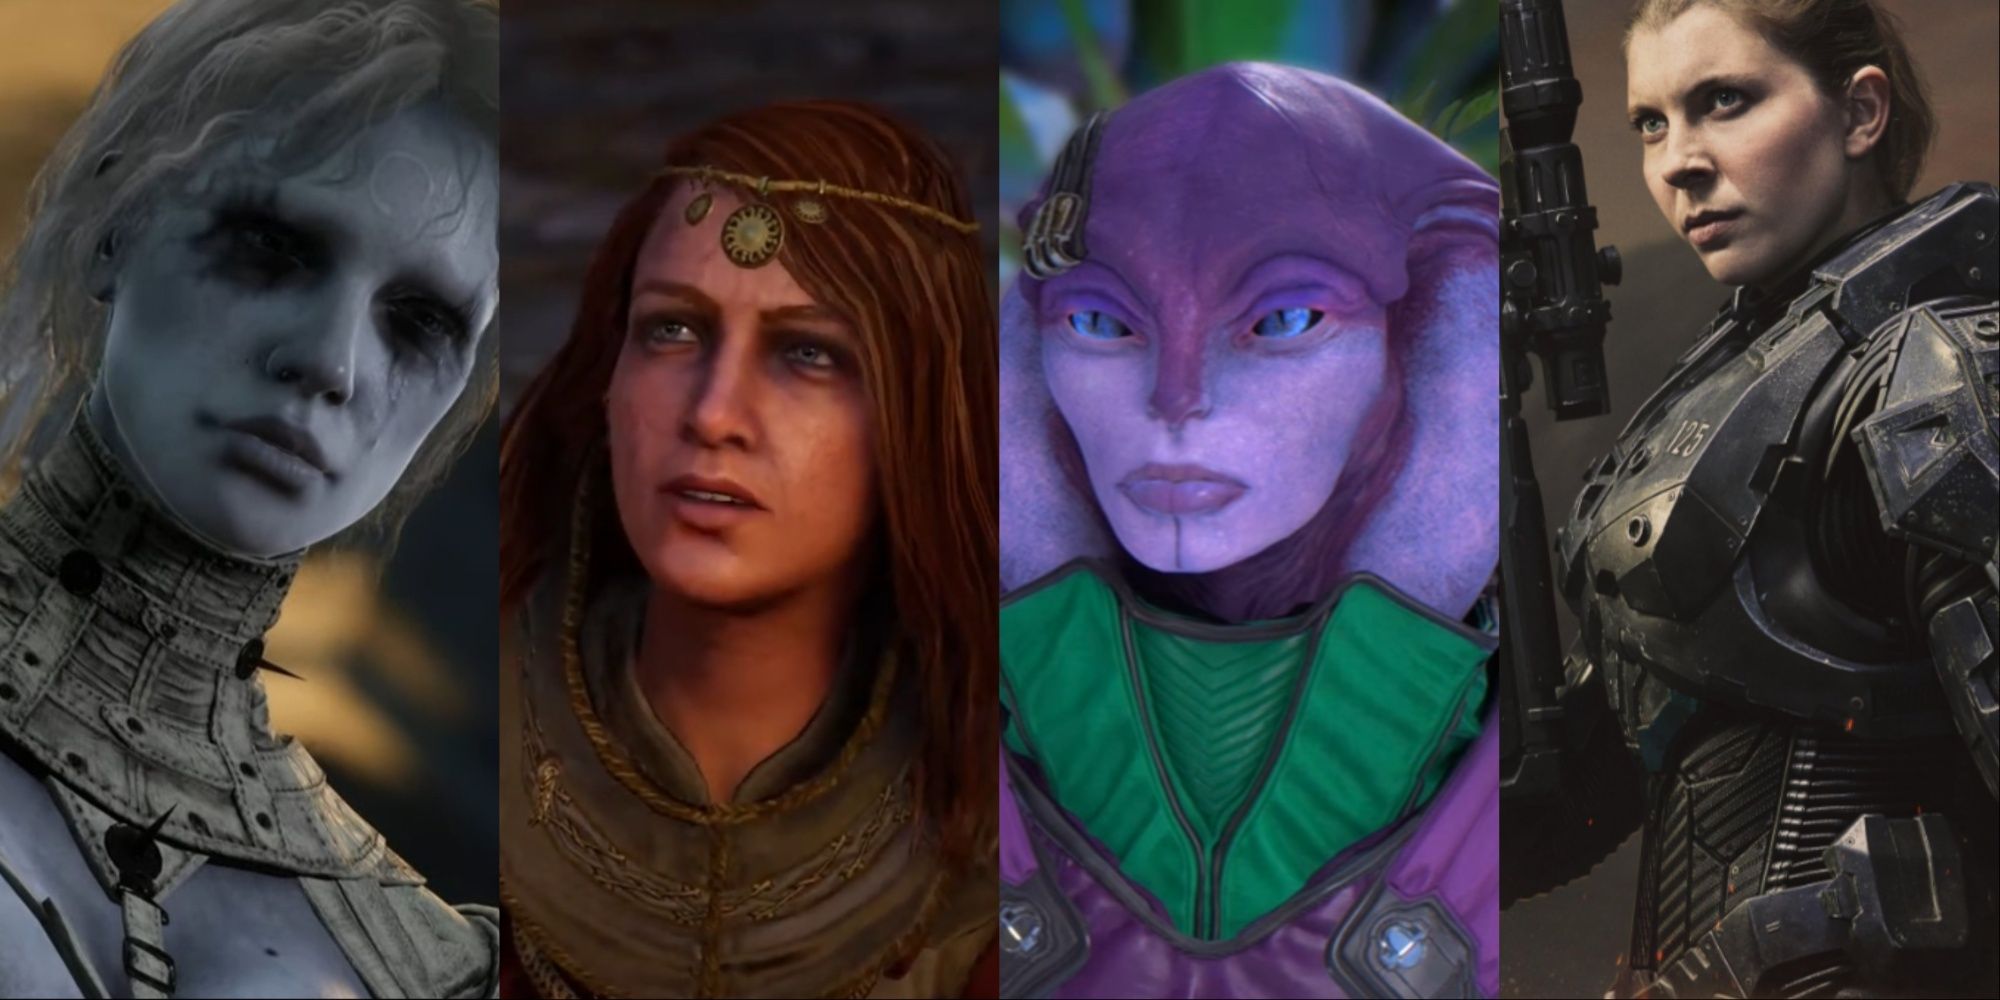 Four-image collage of Laxasia The Complete's second form in Lies of P, Lady Eadwyn in AC Valhalla, Avela Kjar in ass Effect: Andromeda, and Kate Kennedy as Kai-125 in Halo.